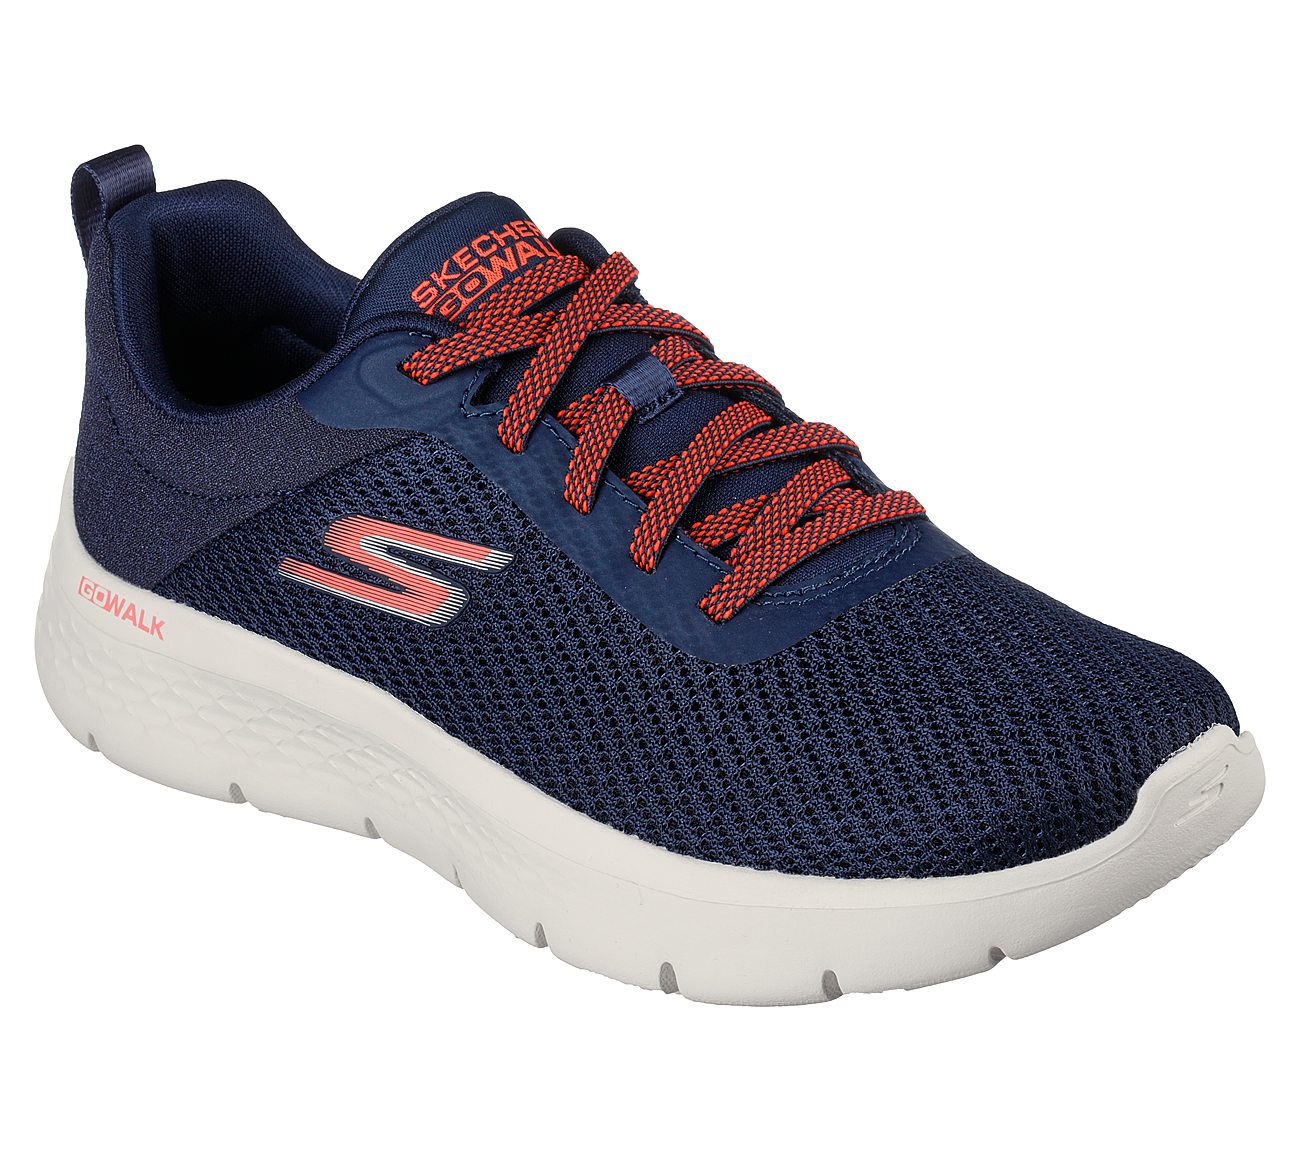 GO WALK FLEX, NAVY/CORAL Footwear Lateral View